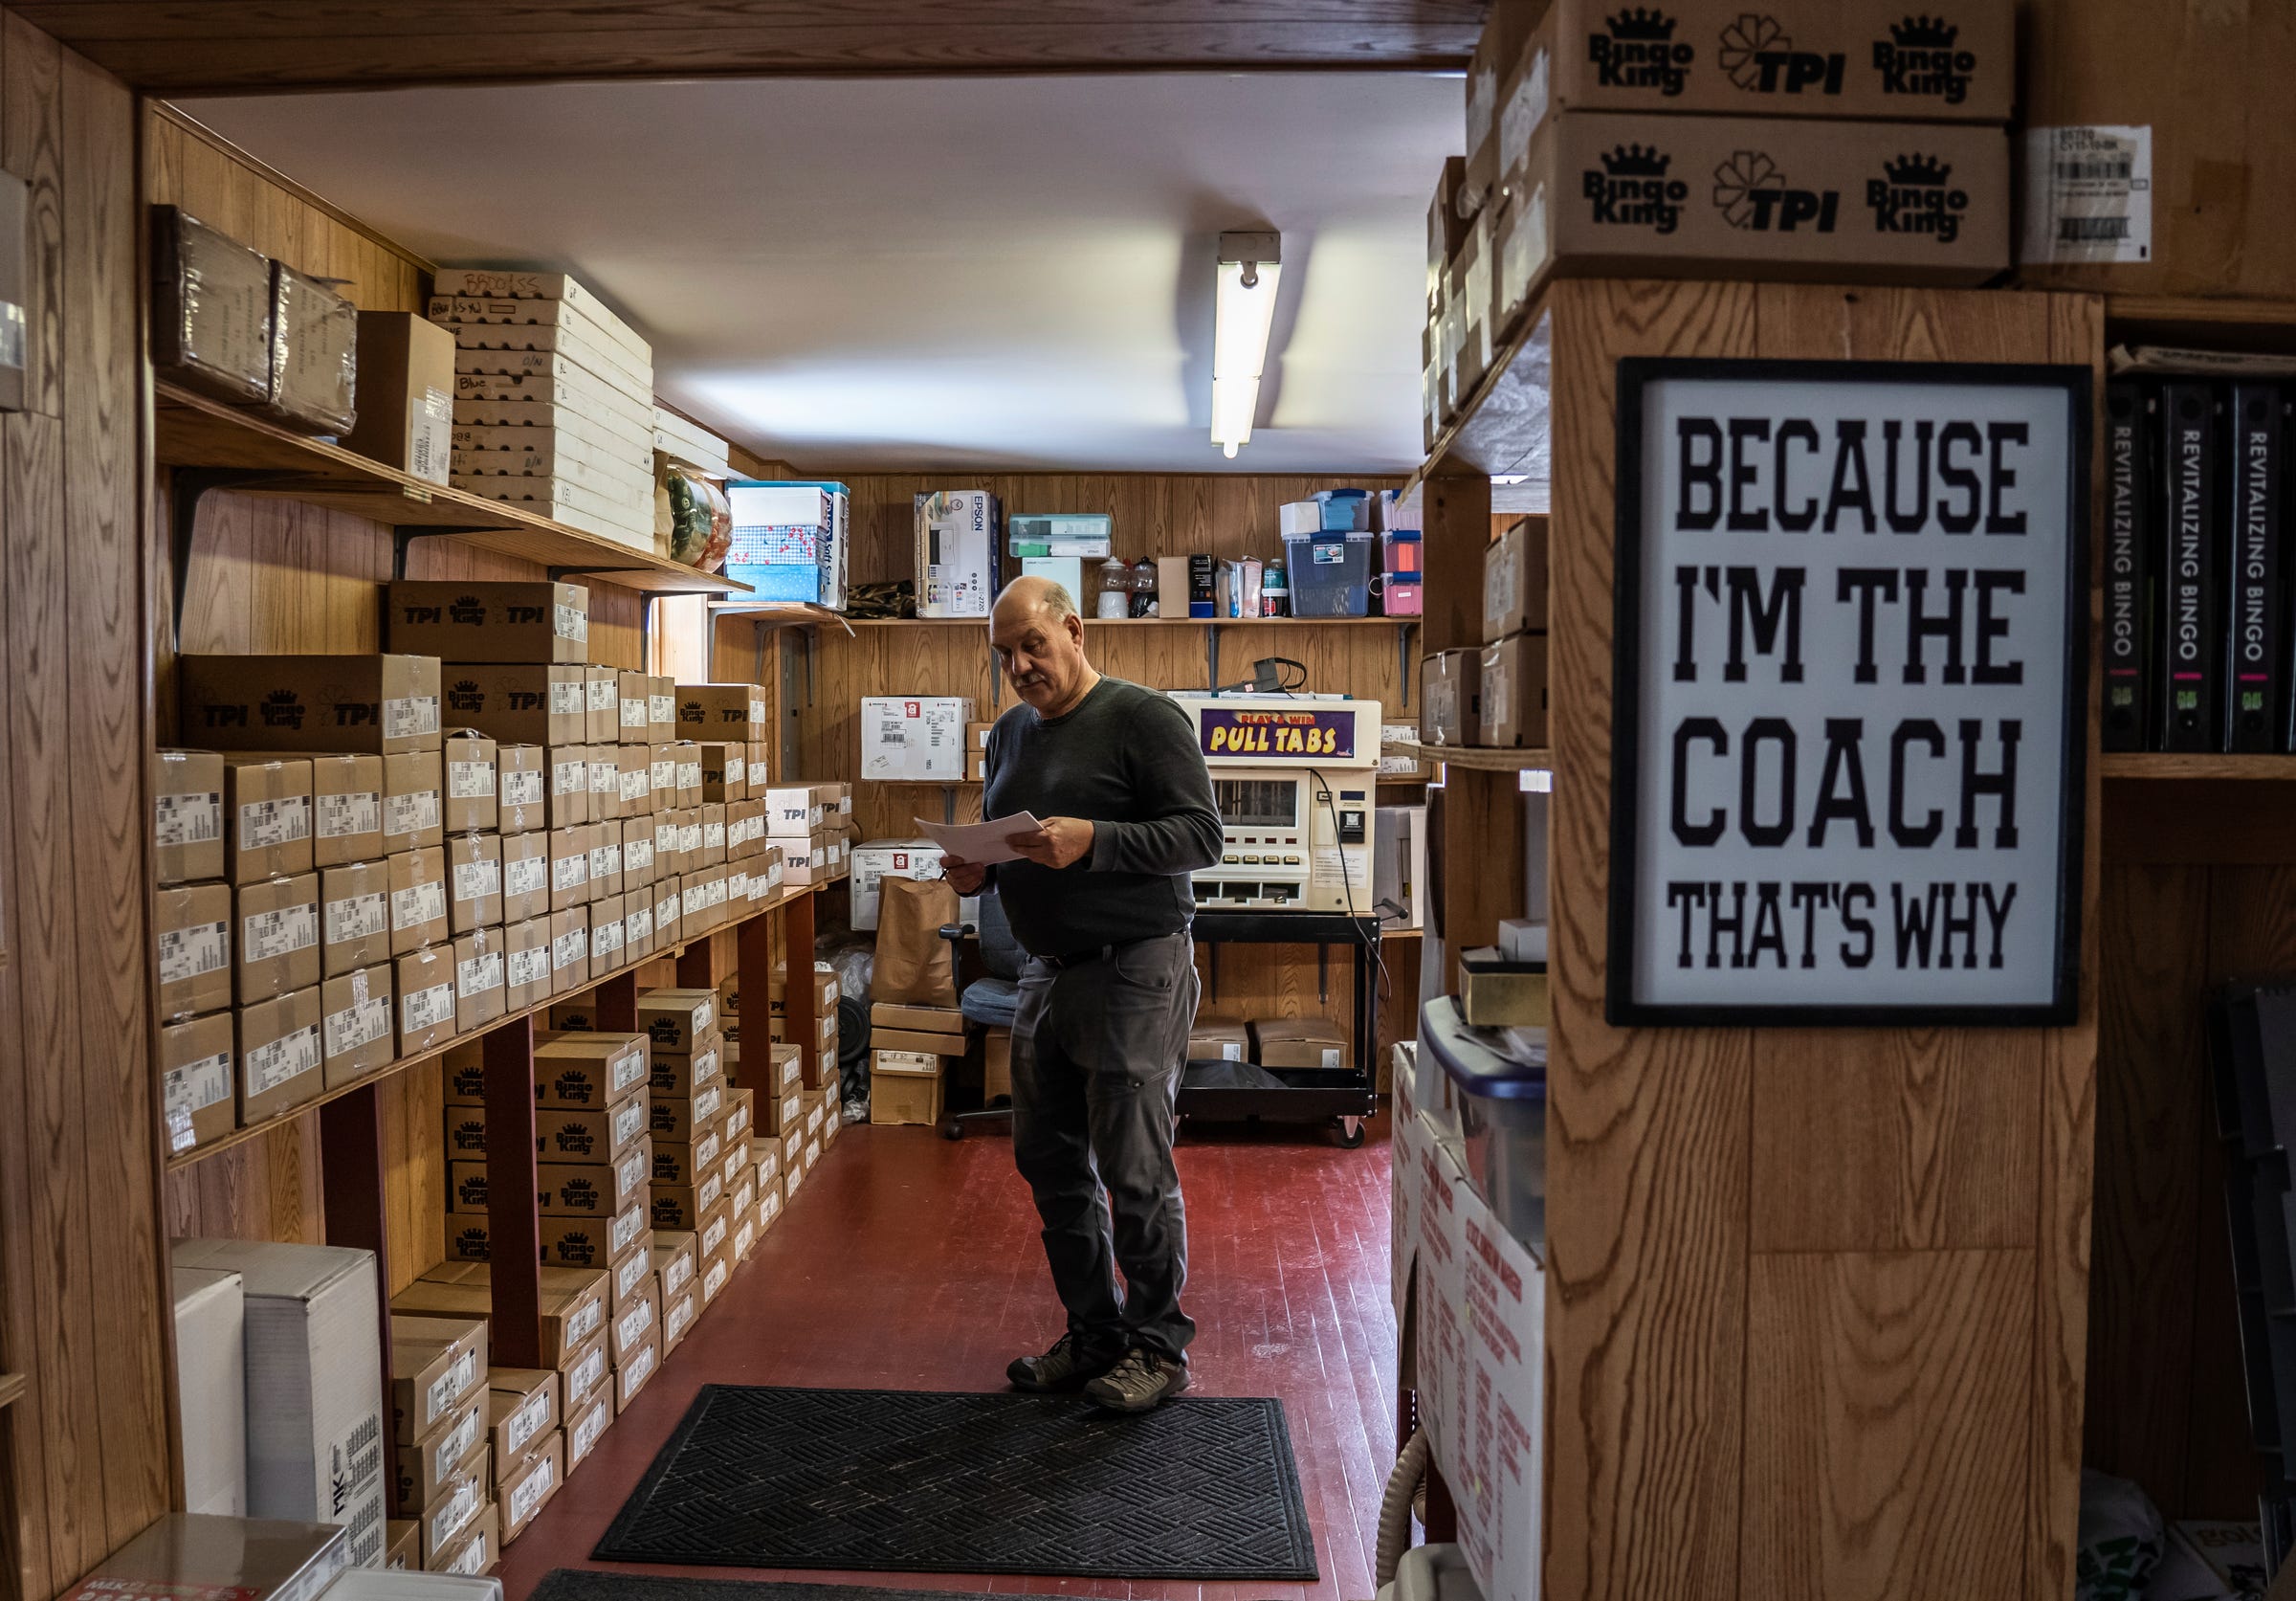 Higgins Bingo Supplies owner Jim Higgins, who spent years coaching the NMU women's hockey team, looks over an order for a client in the back room of his store in Marquette on Friday, Feb. 10, 2023. “I don’t know if it’ll ever come back the way it was,” he said. “I’ve got a Rolodex back there that’s loaded with all our closed accounts. Three-quarters of the bingos up here have shut down."